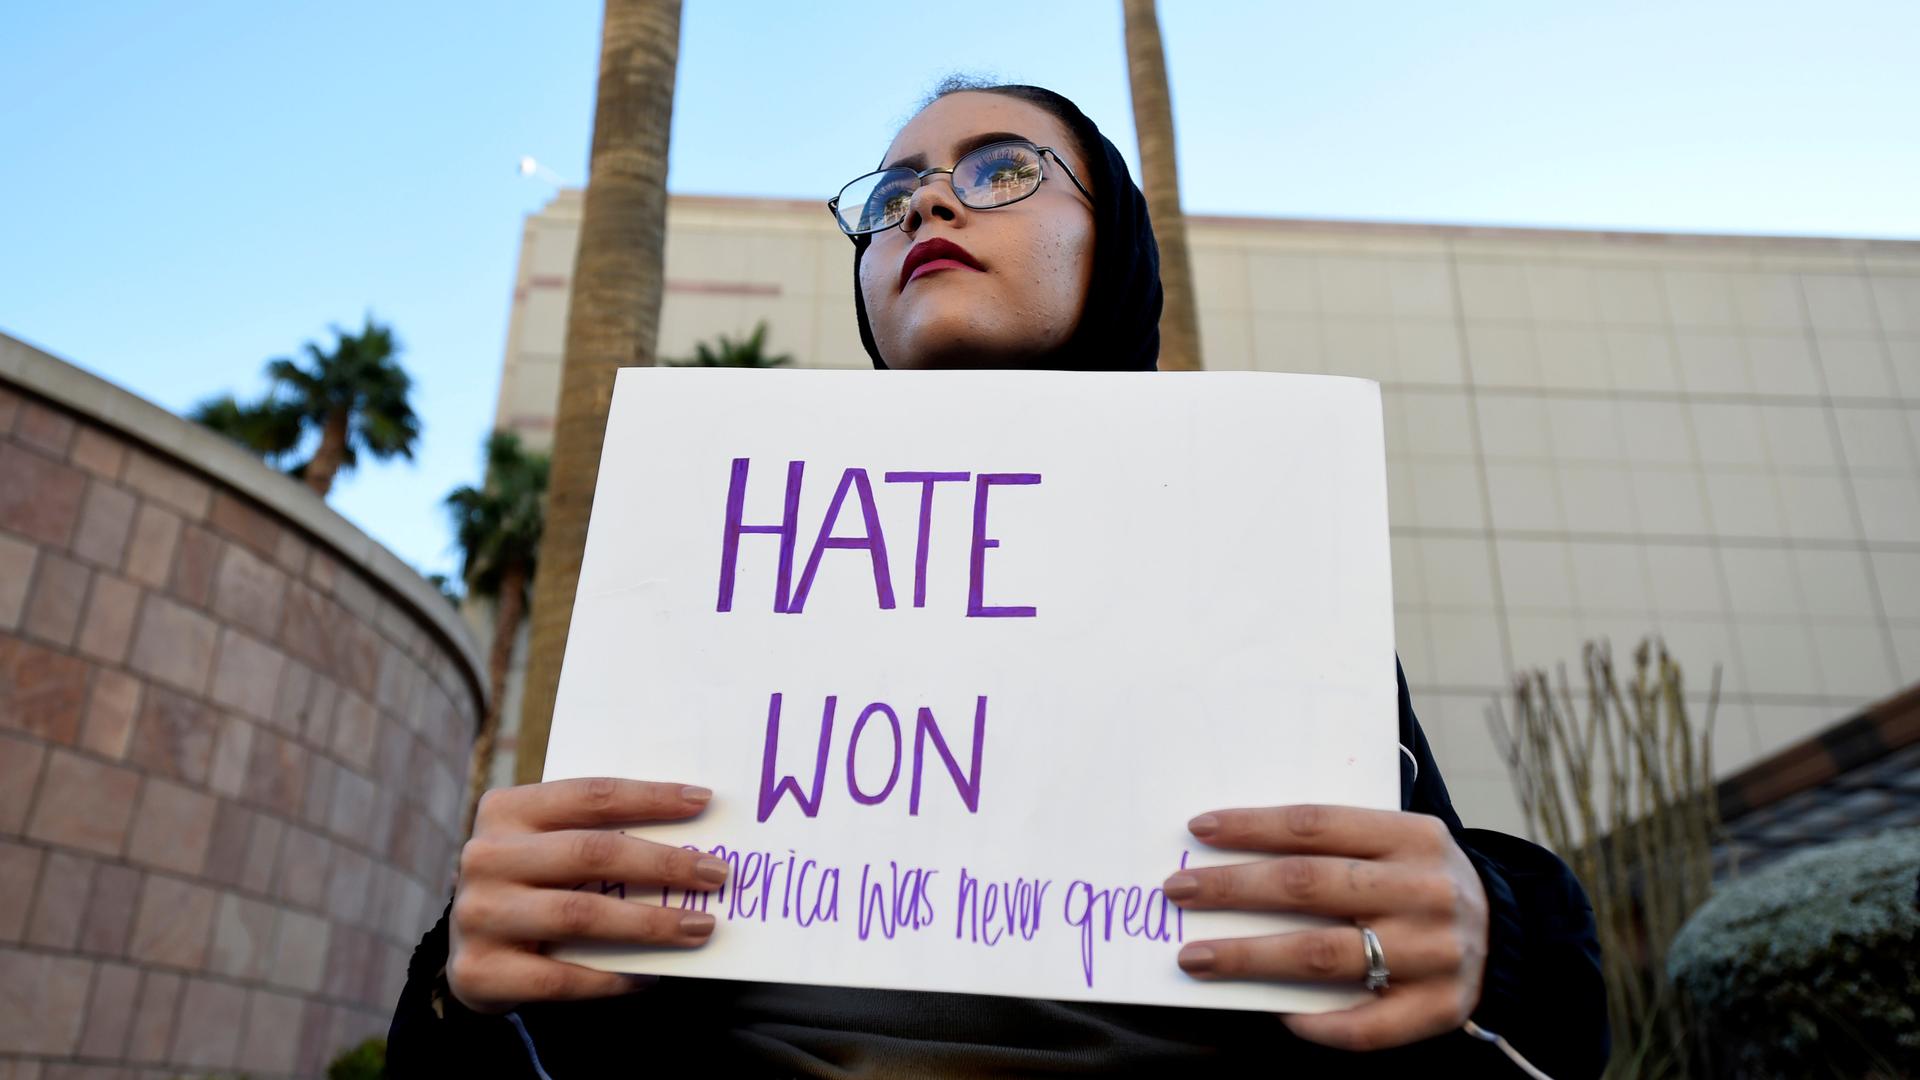 Krystina Robinson of Las Vegas carries a placard in protest against the election of Donald Trump, near the Trump Hotel and Tower in Las Vegas.